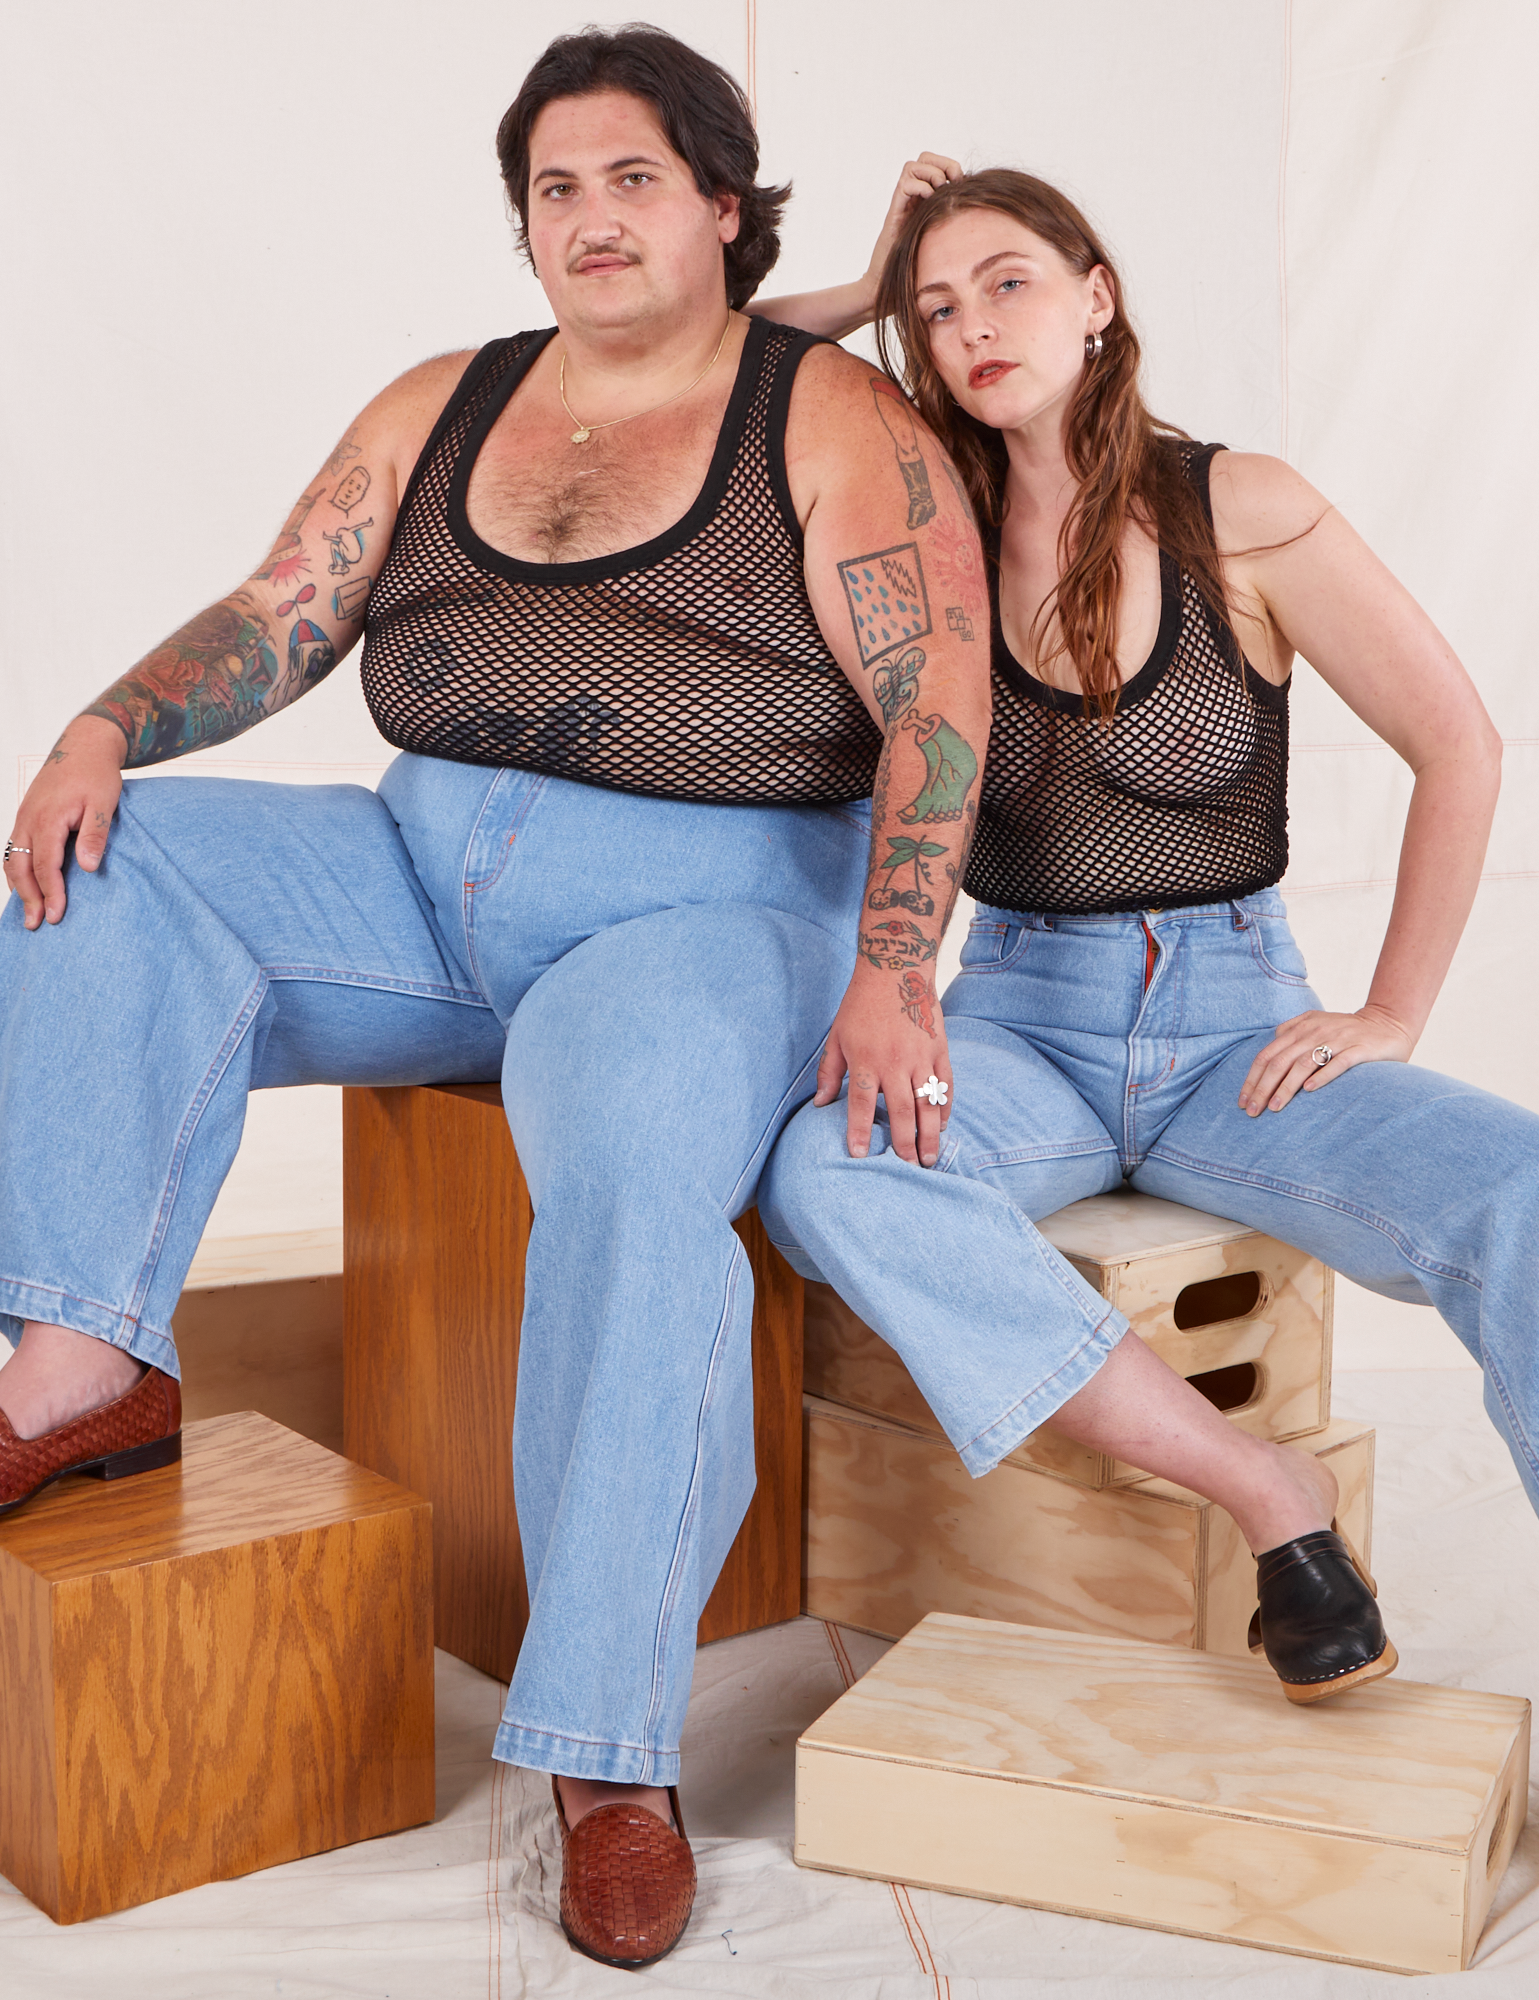 Sam and Allison are both wearing Mesh Tank Top in Basic Black and light wash Sailor Jeans